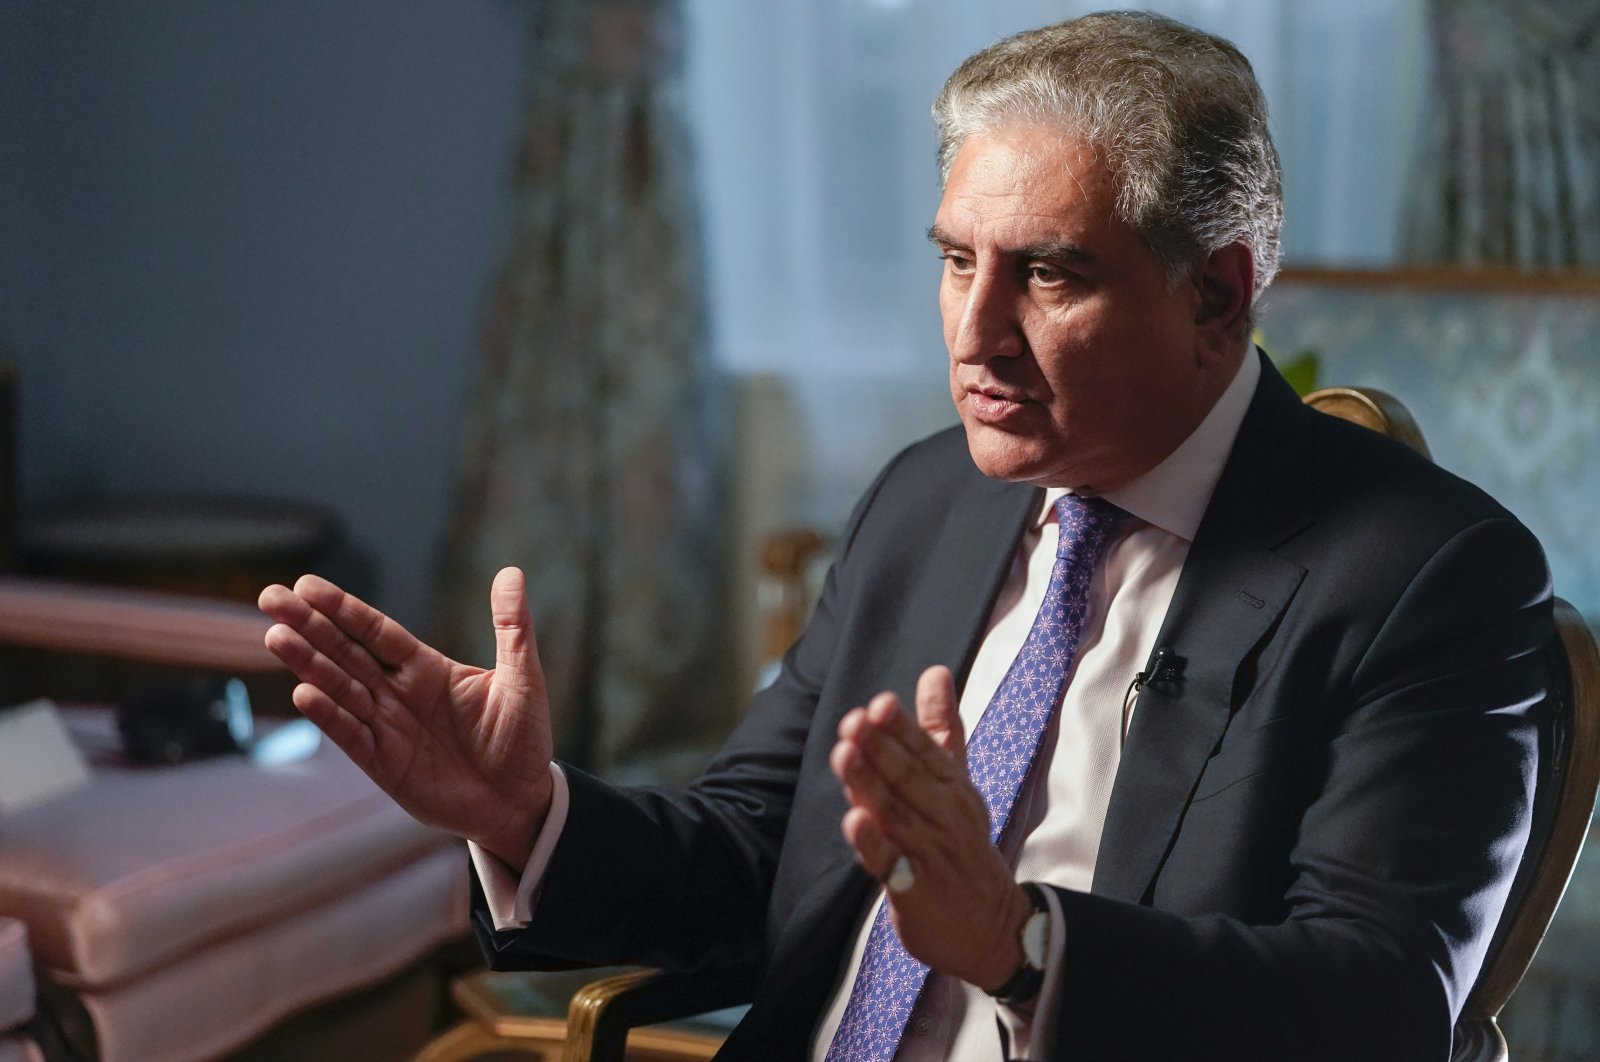 Pakistan's Foreign Minister Shah Mehmood Qureshi speaks during an interview with The Associated Press, Sept. 22, 2021, in New York, U.S. (AP Photo)